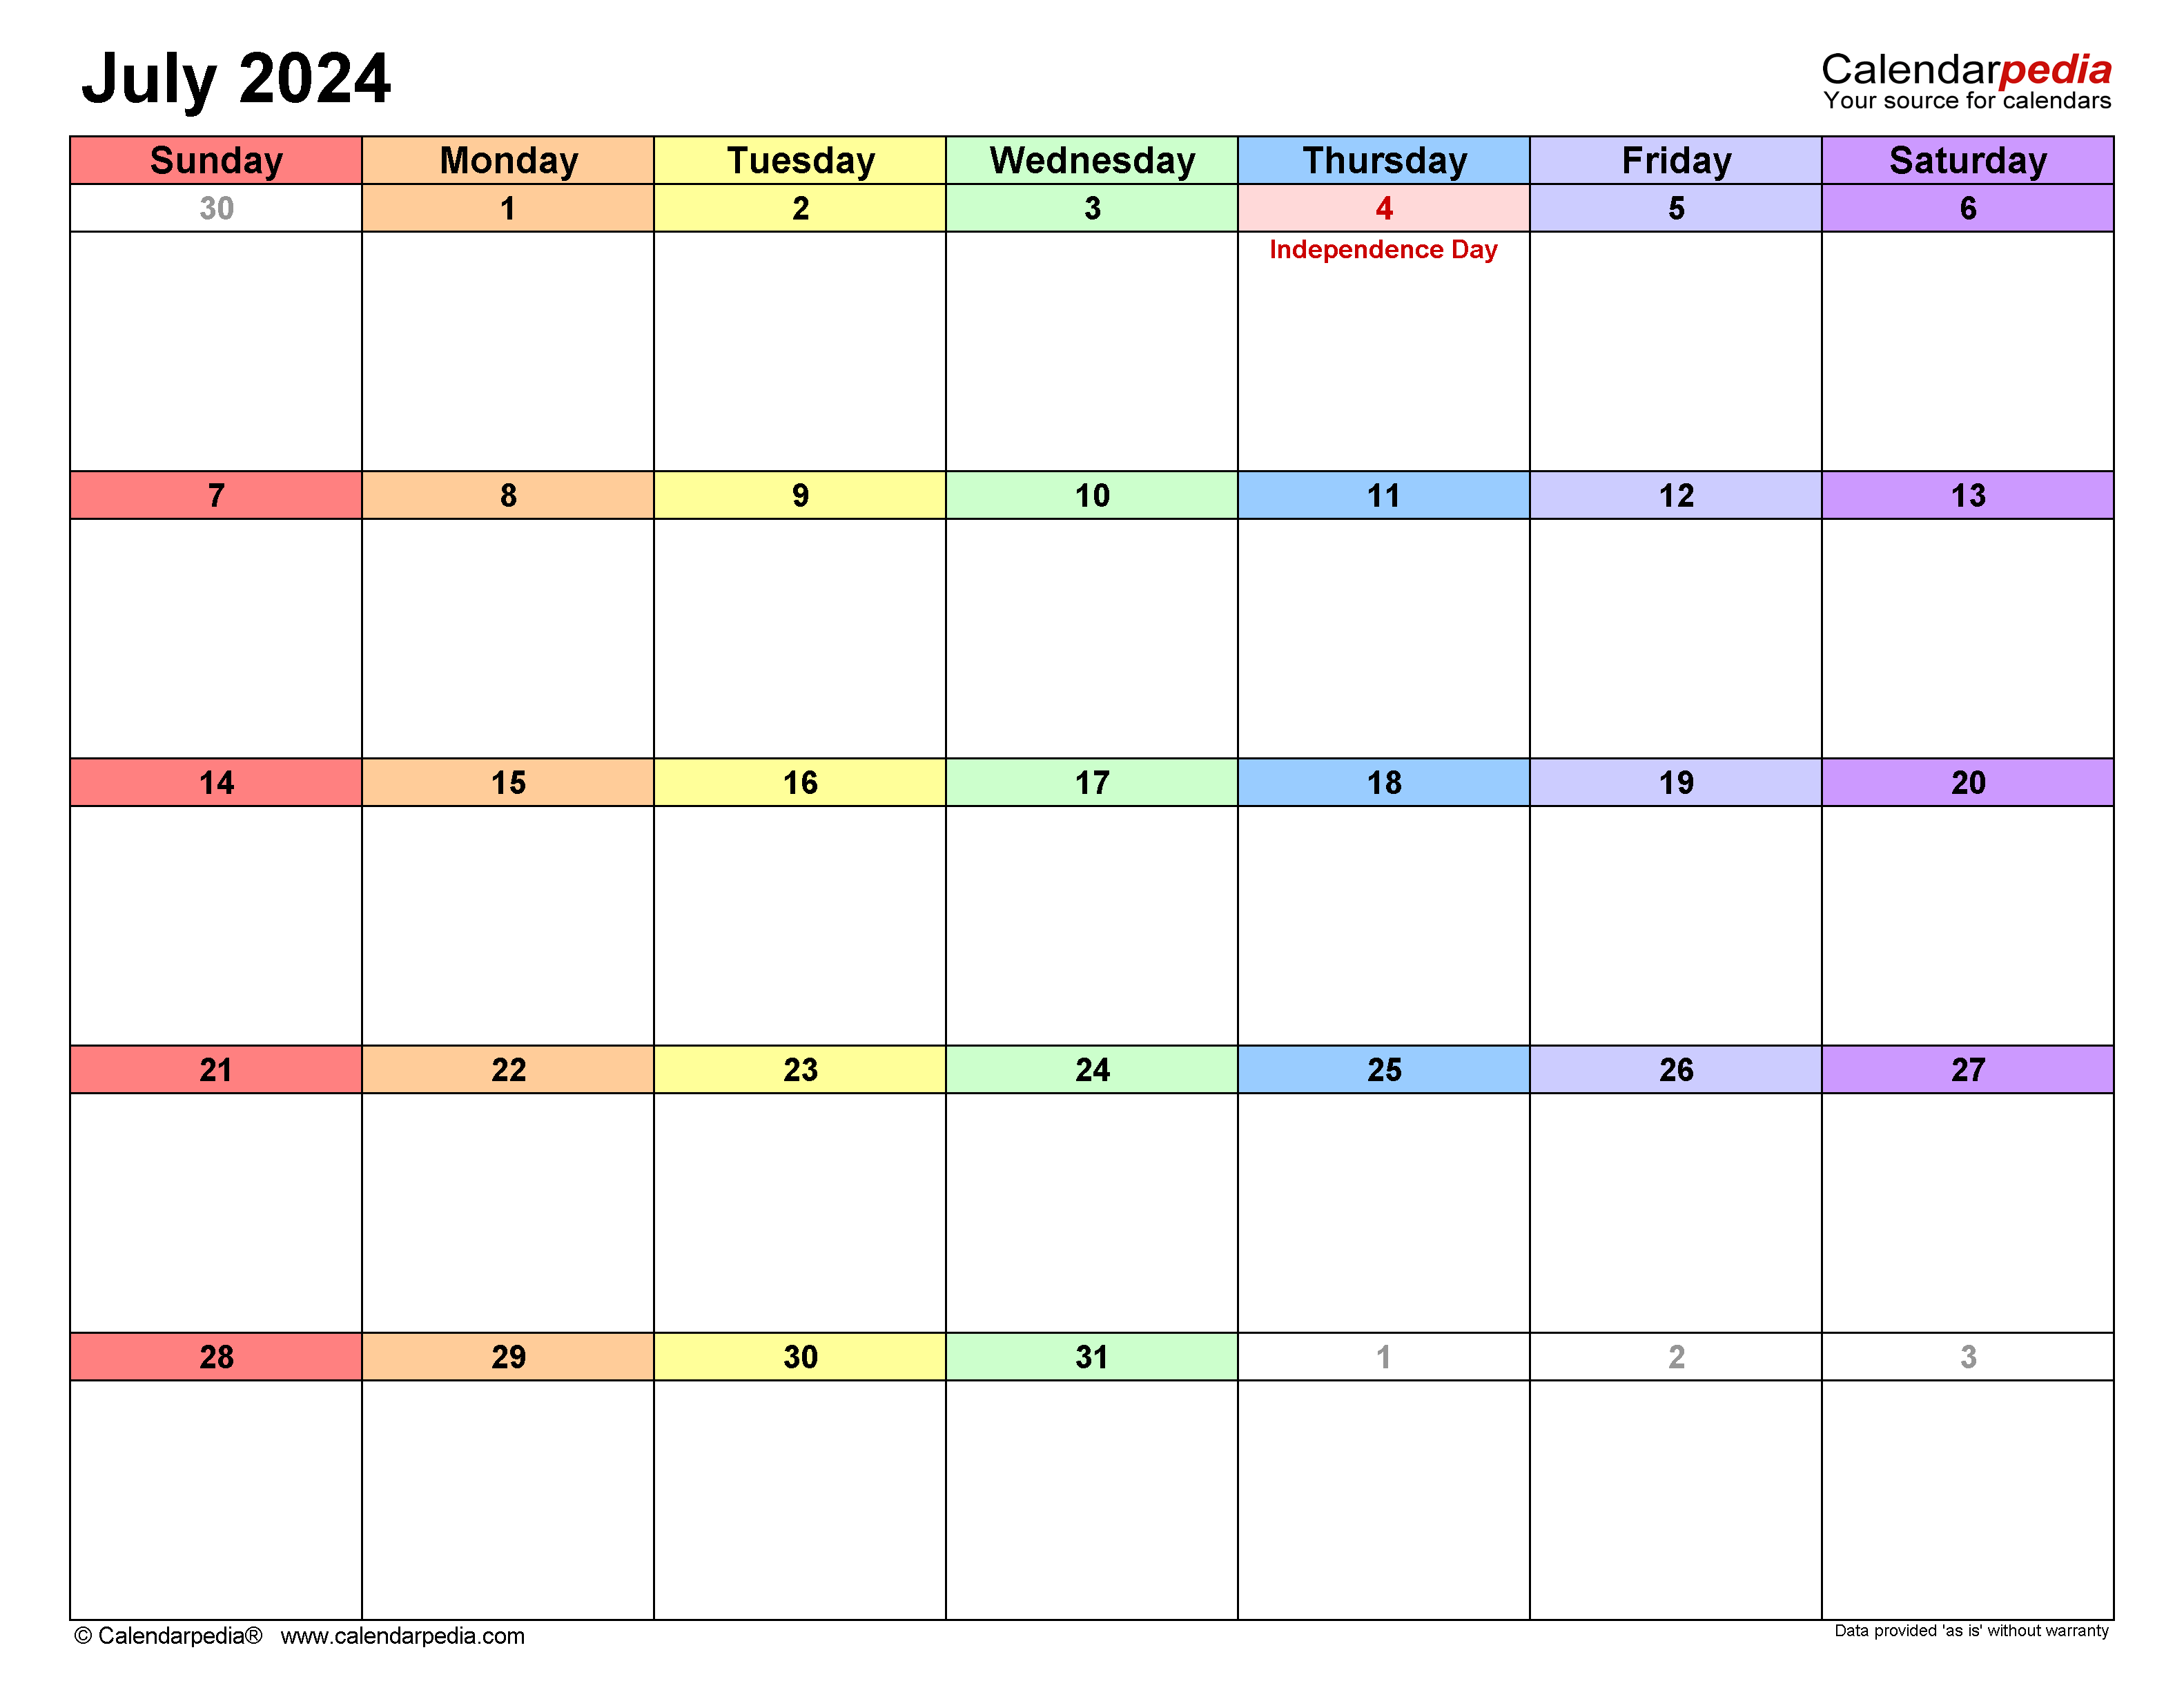 July 2024 Calendar | Templates For Word, Excel And Pdf with July 2024 Calendar Editable